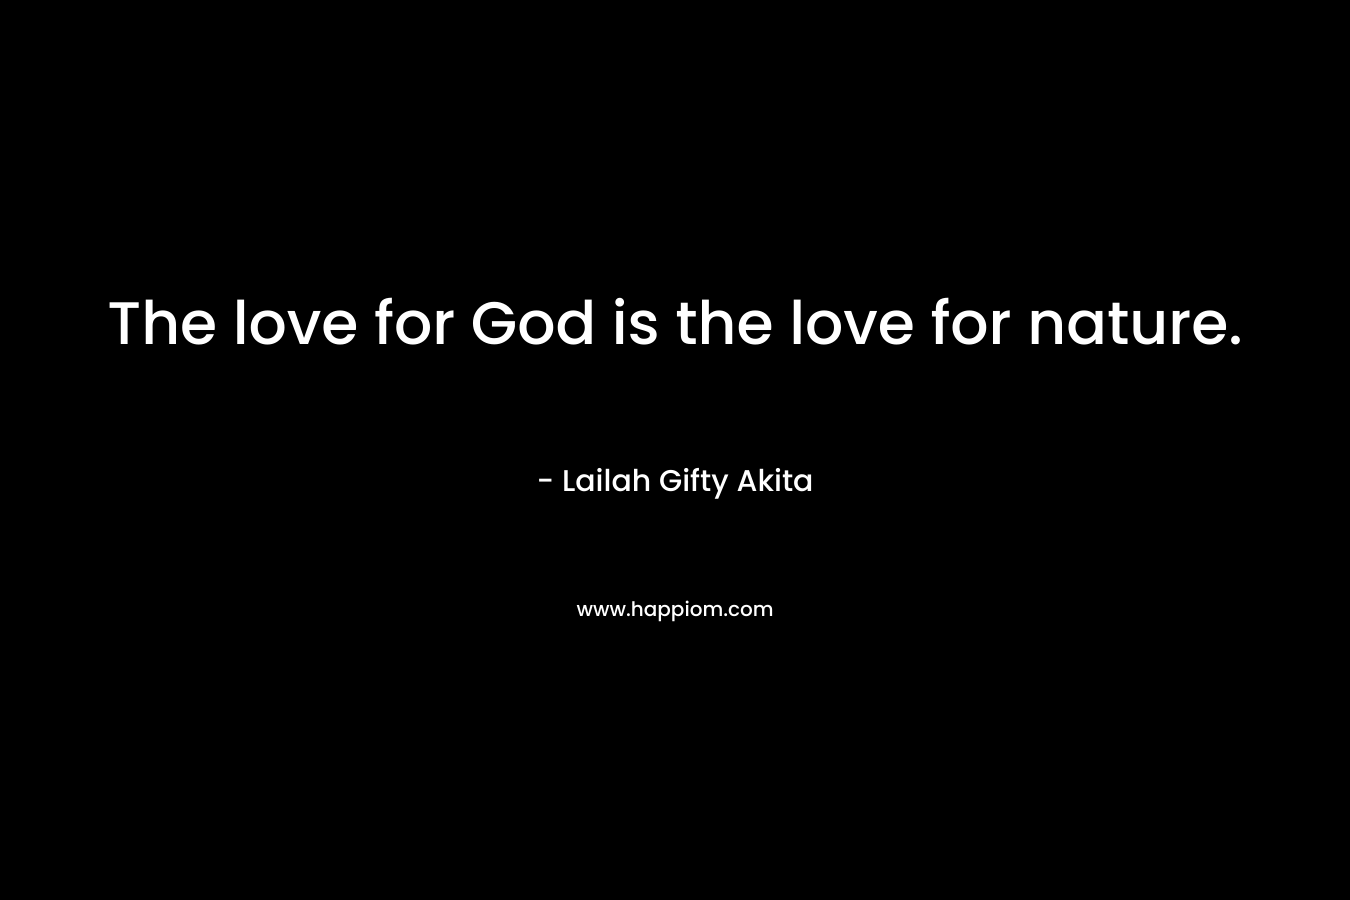 The love for God is the love for nature.